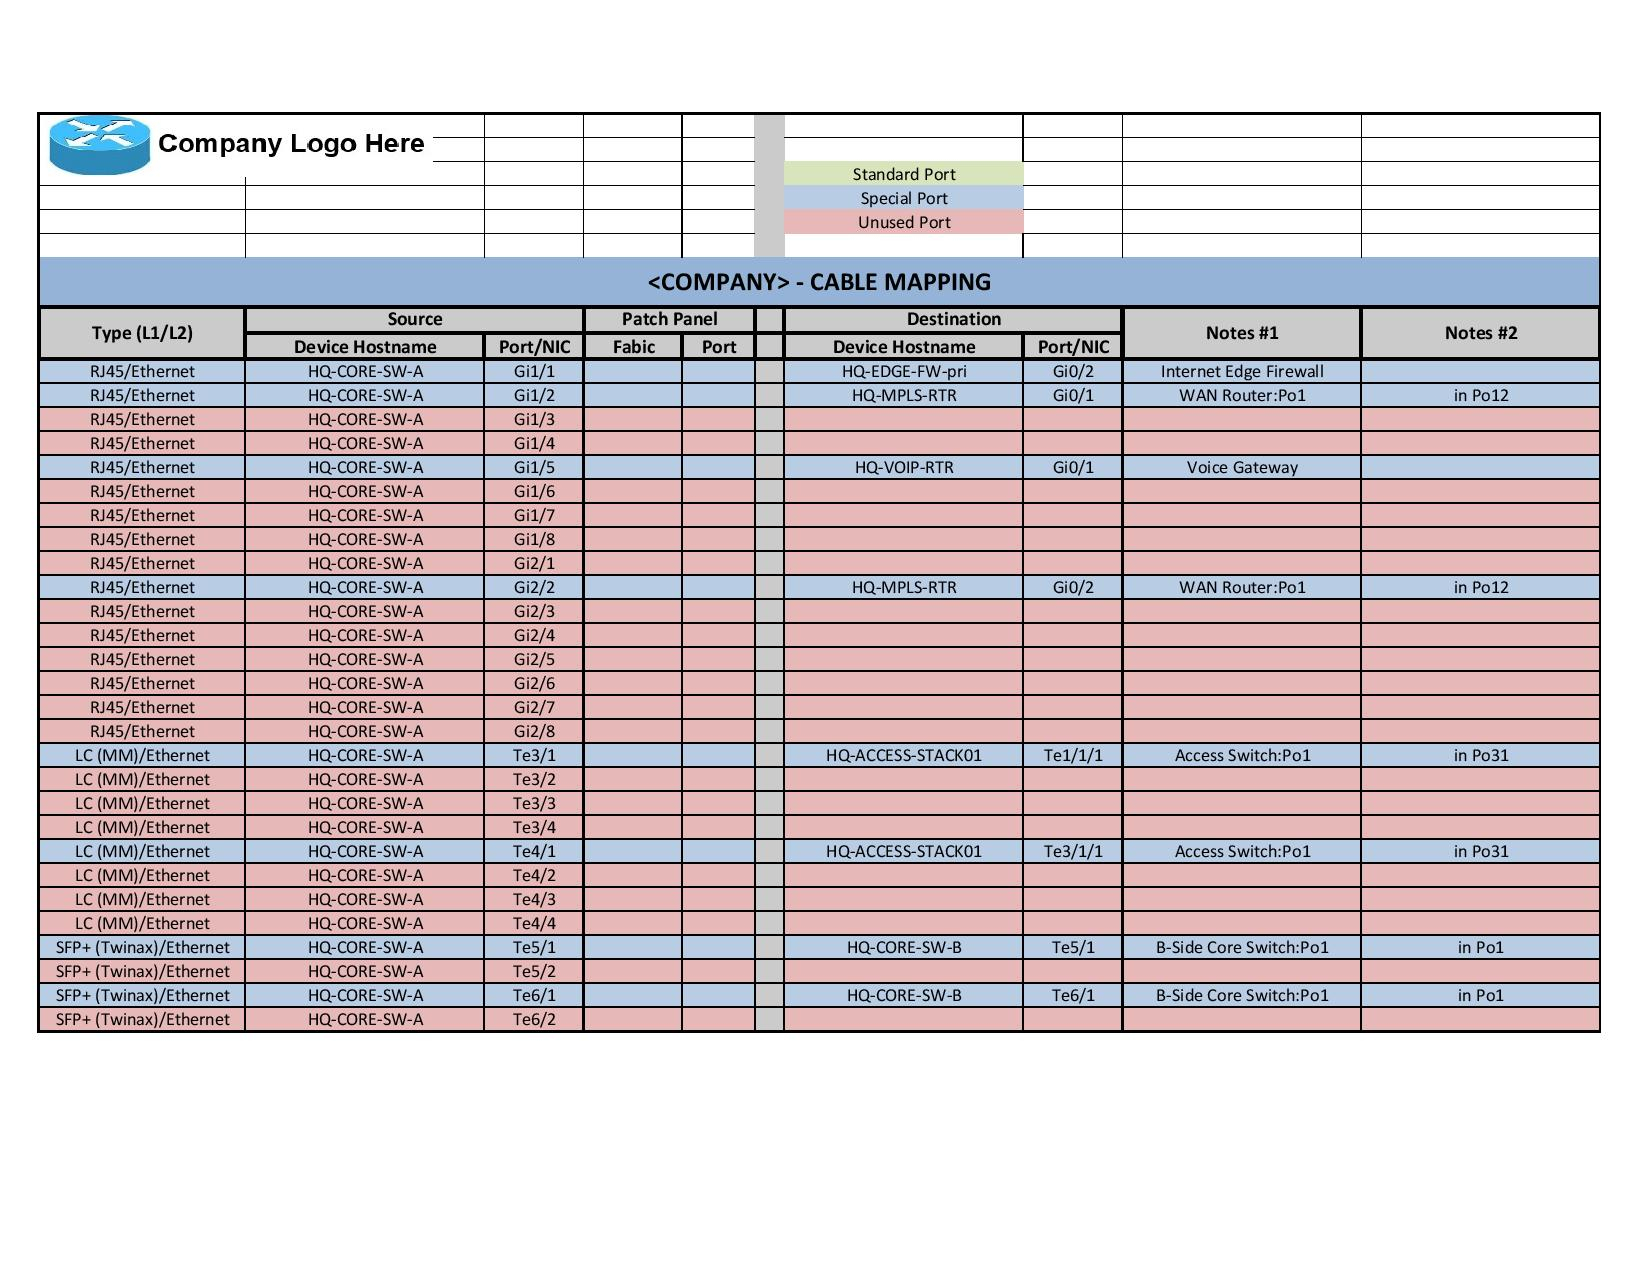 Document Spreadsheet For Network Documentation Series: Port Mapping